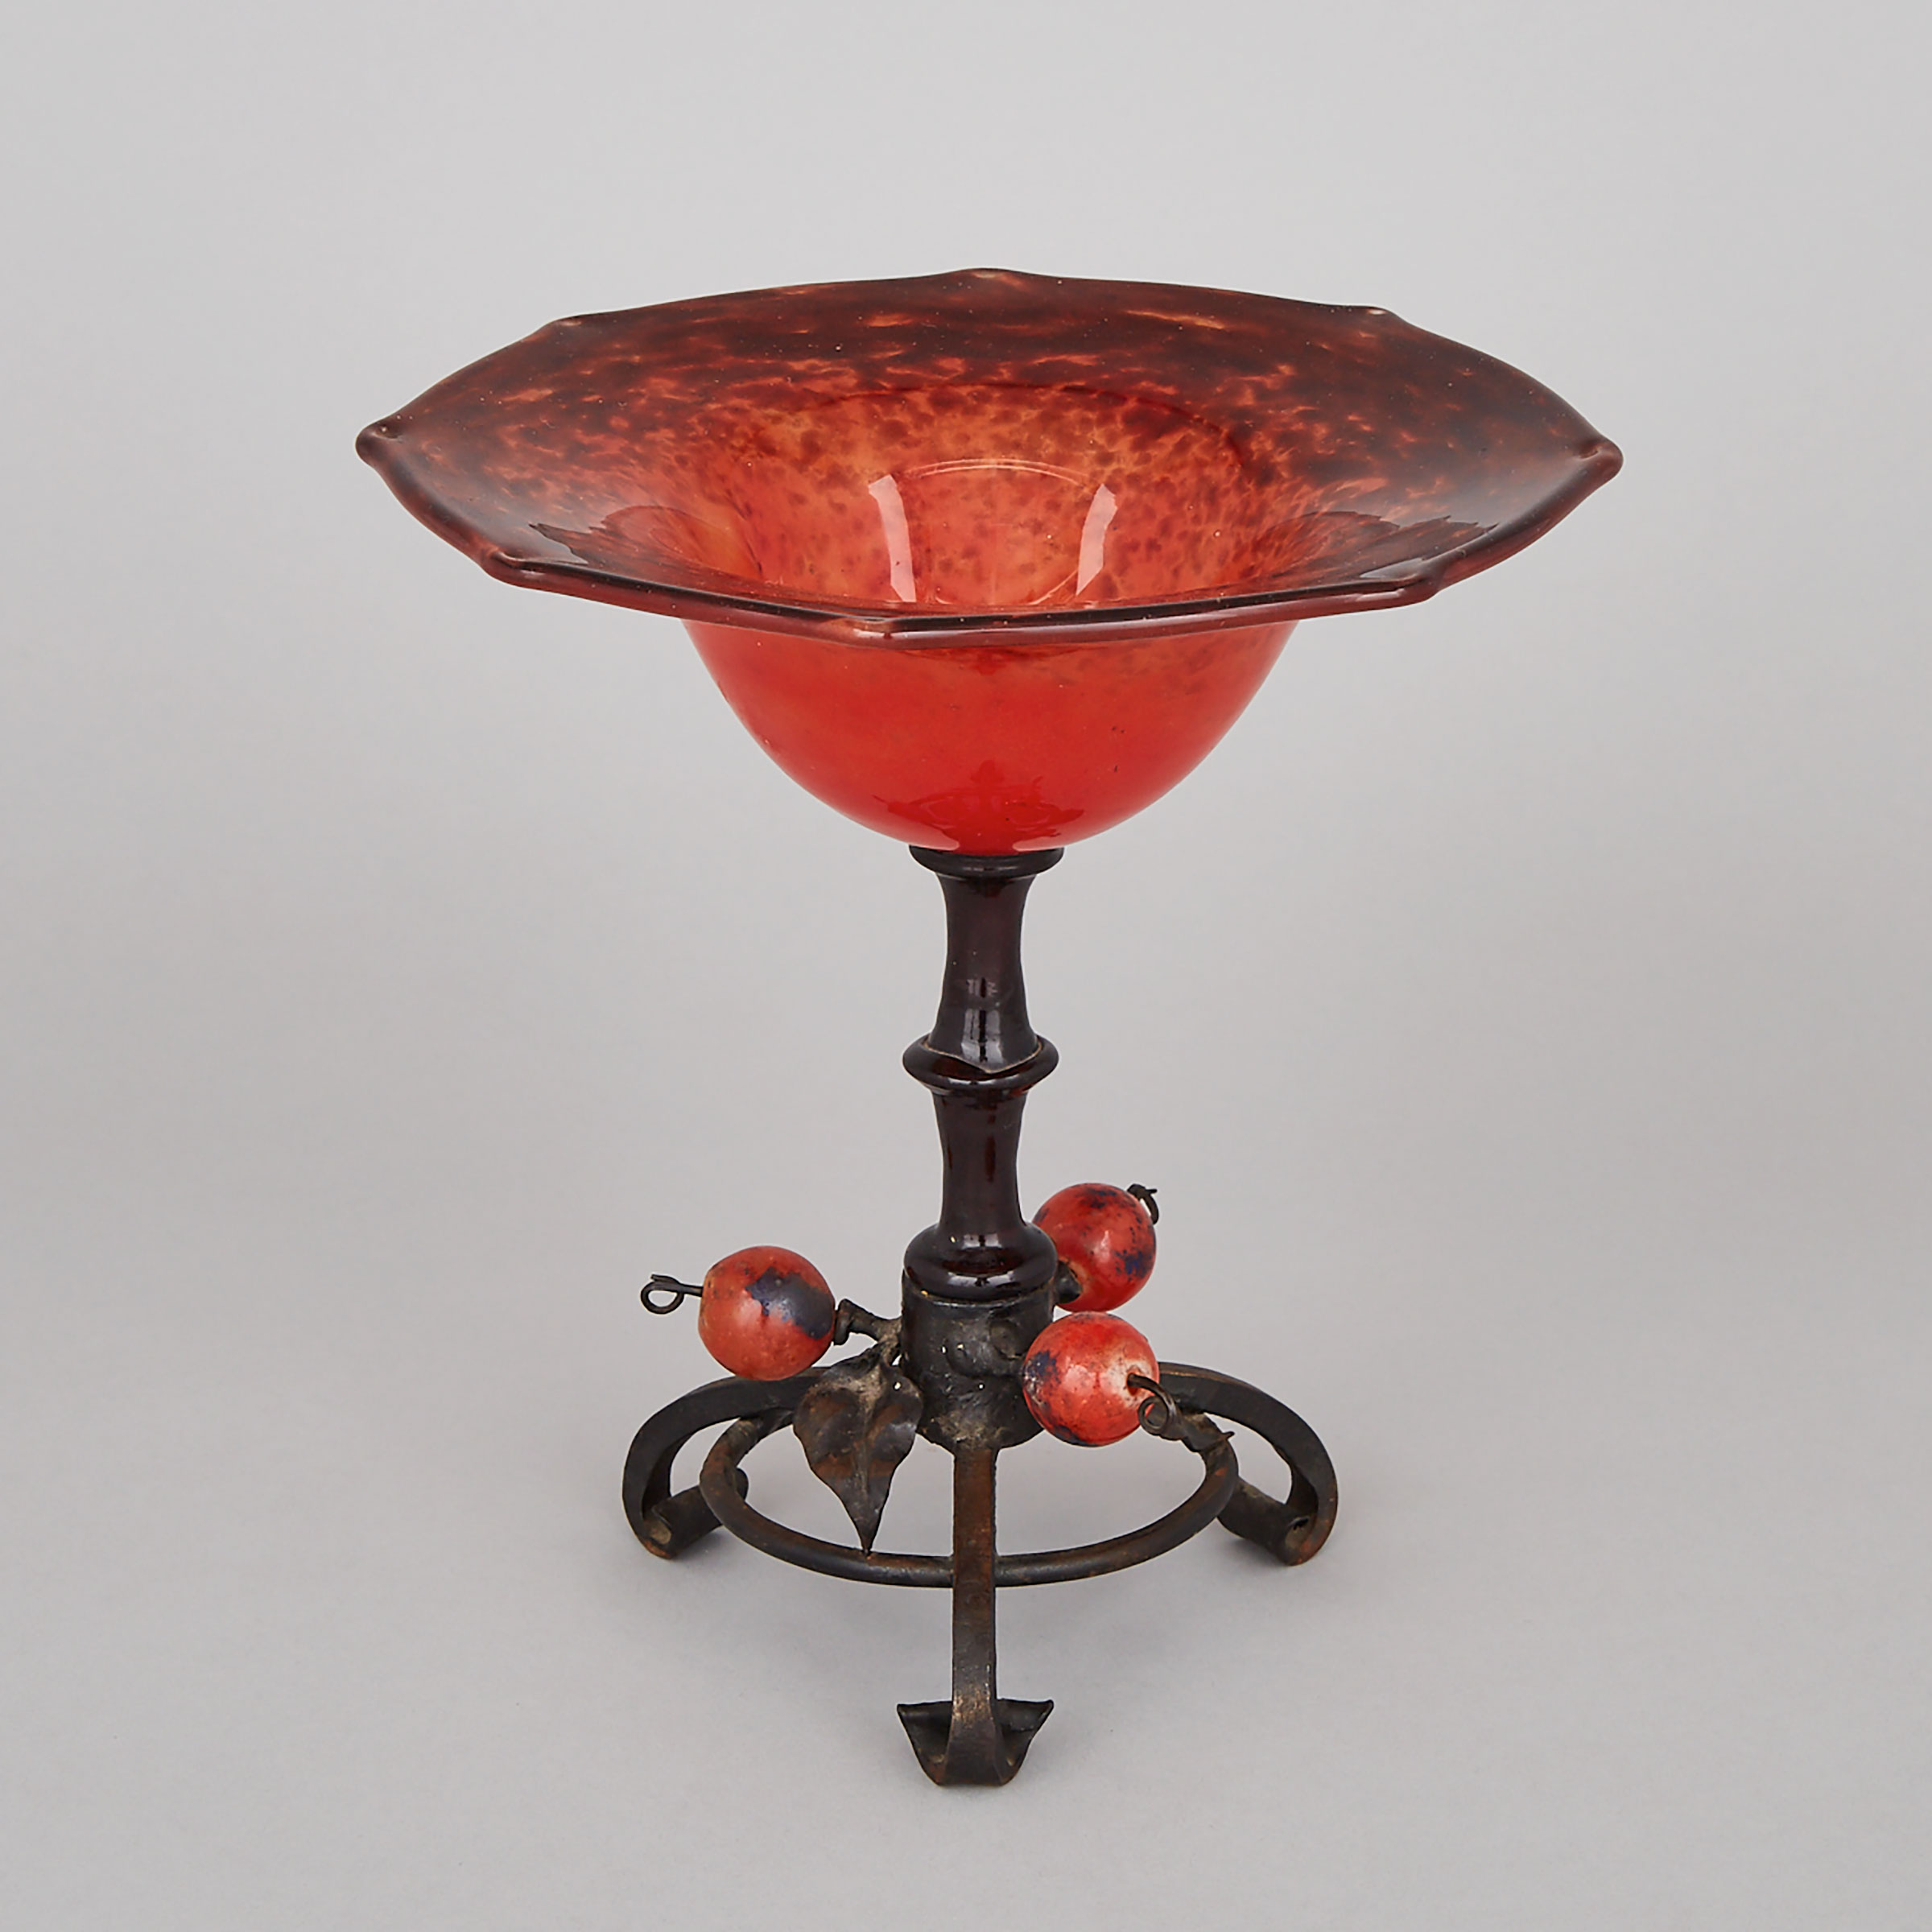 Schneider Wrought Metal Mounted Mottled Orange Glass Footed Comport, early 20th century